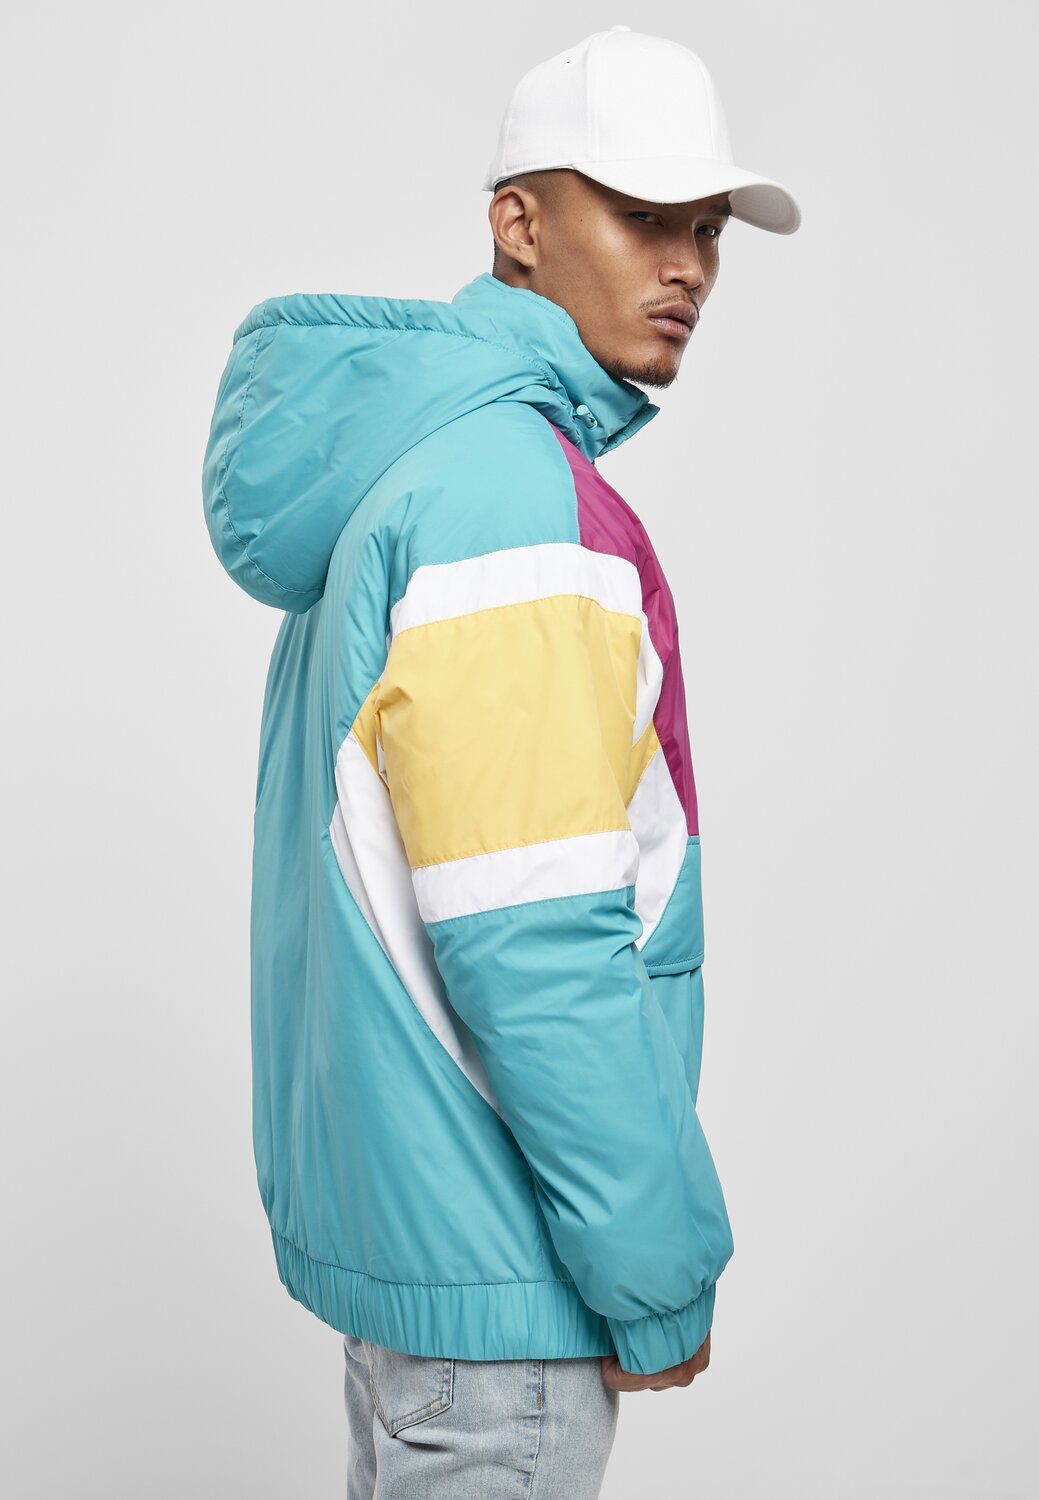 jacket Starter blue/pink/yellow/white | turquoise MAXISCOOT